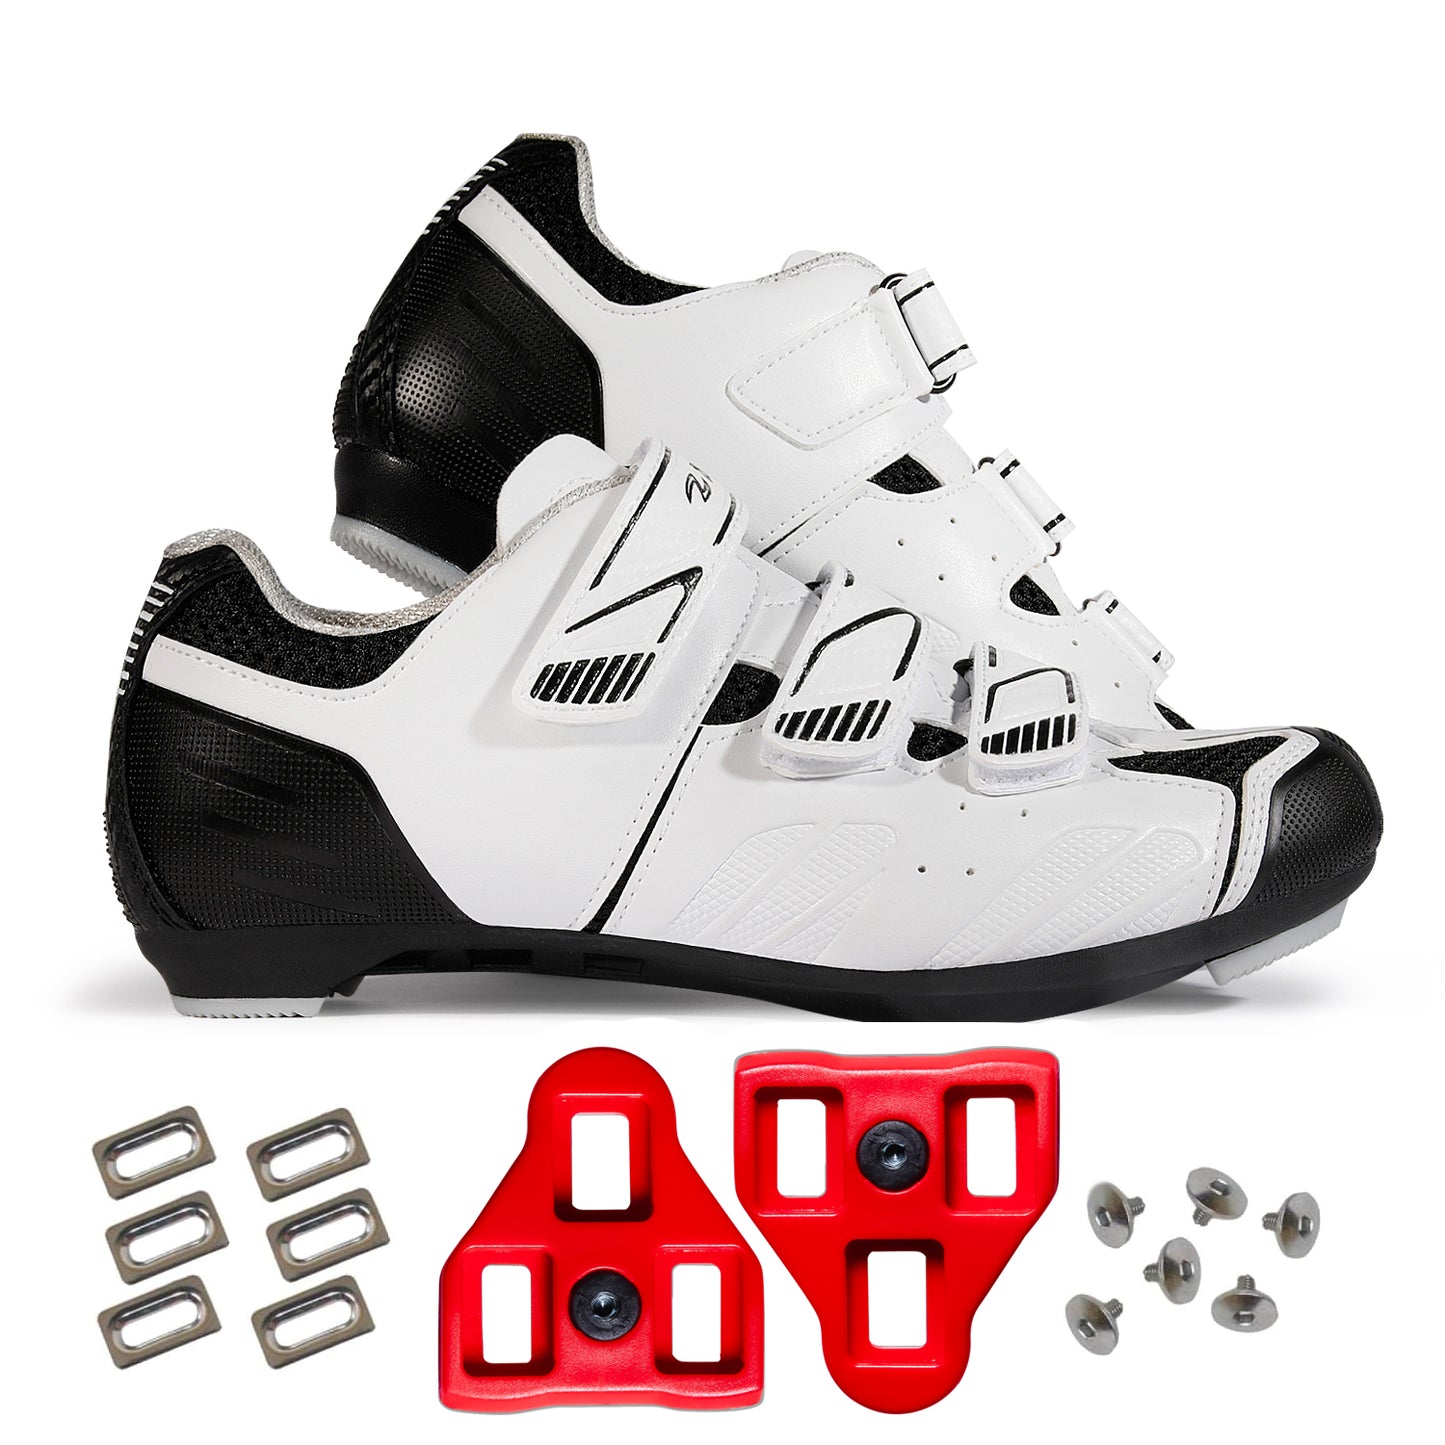 Zol Stage Road Cycling Shoes 6-Degree Delta Look Cleats Included Compatible with Peloton